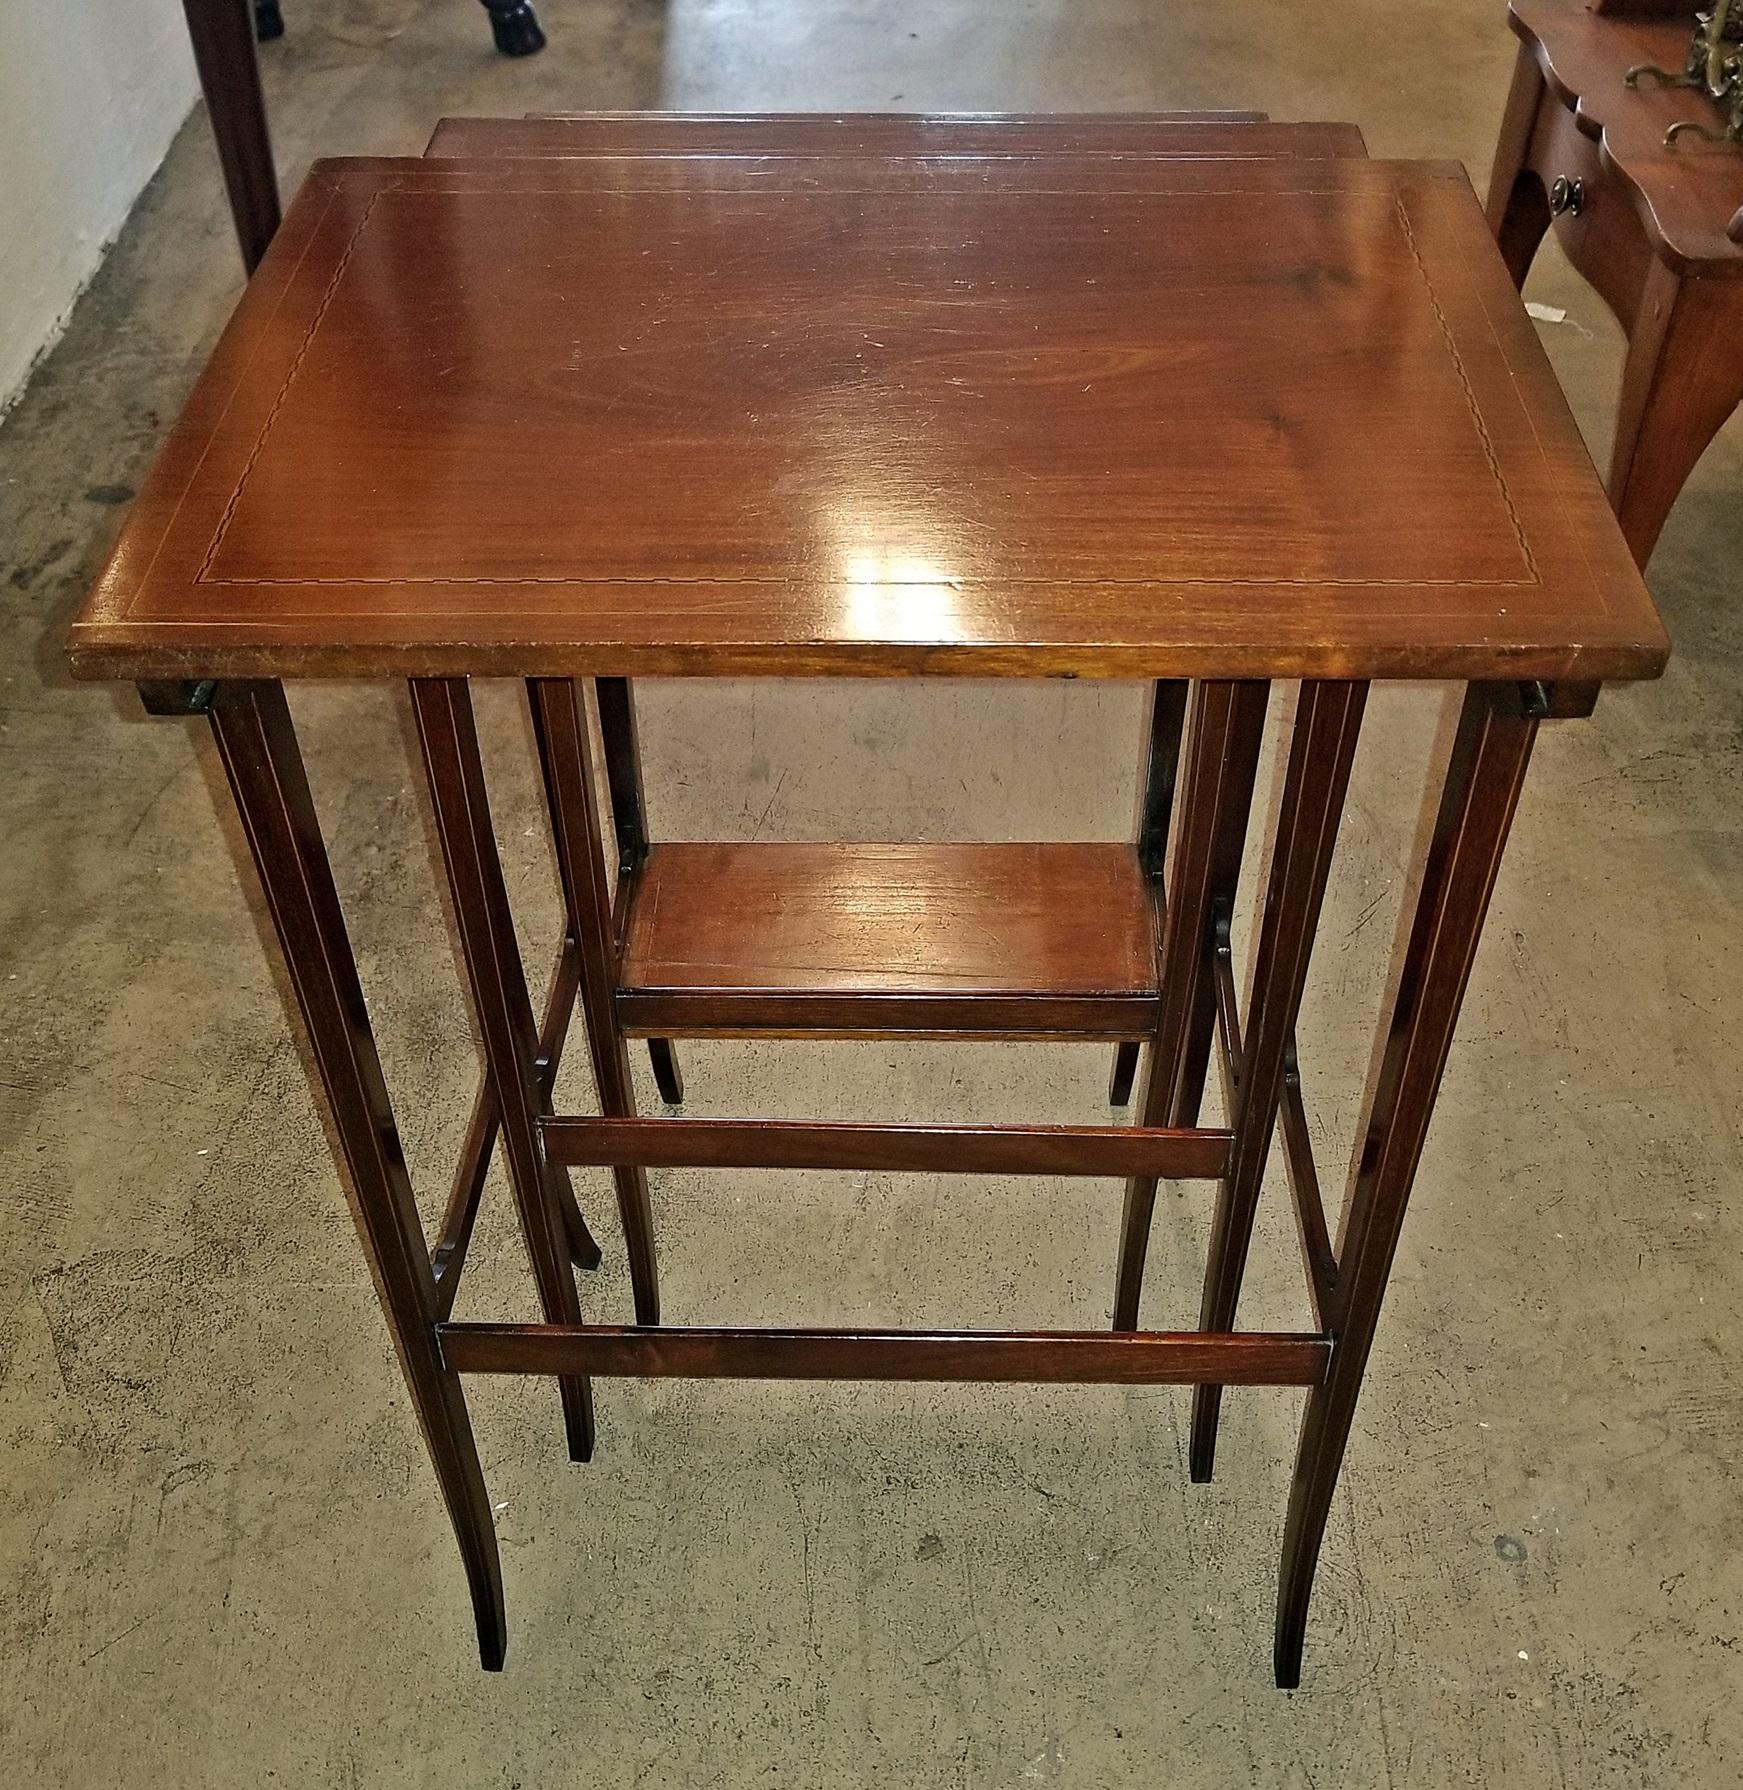 Lovely early 20th centurty British nest of 3 graduating mahogany and inlaid tables

Set of 3 nest of tables……each one smaller than the other so that they fit away as one.

Inlaid with satinwood stringing and made of glorious red